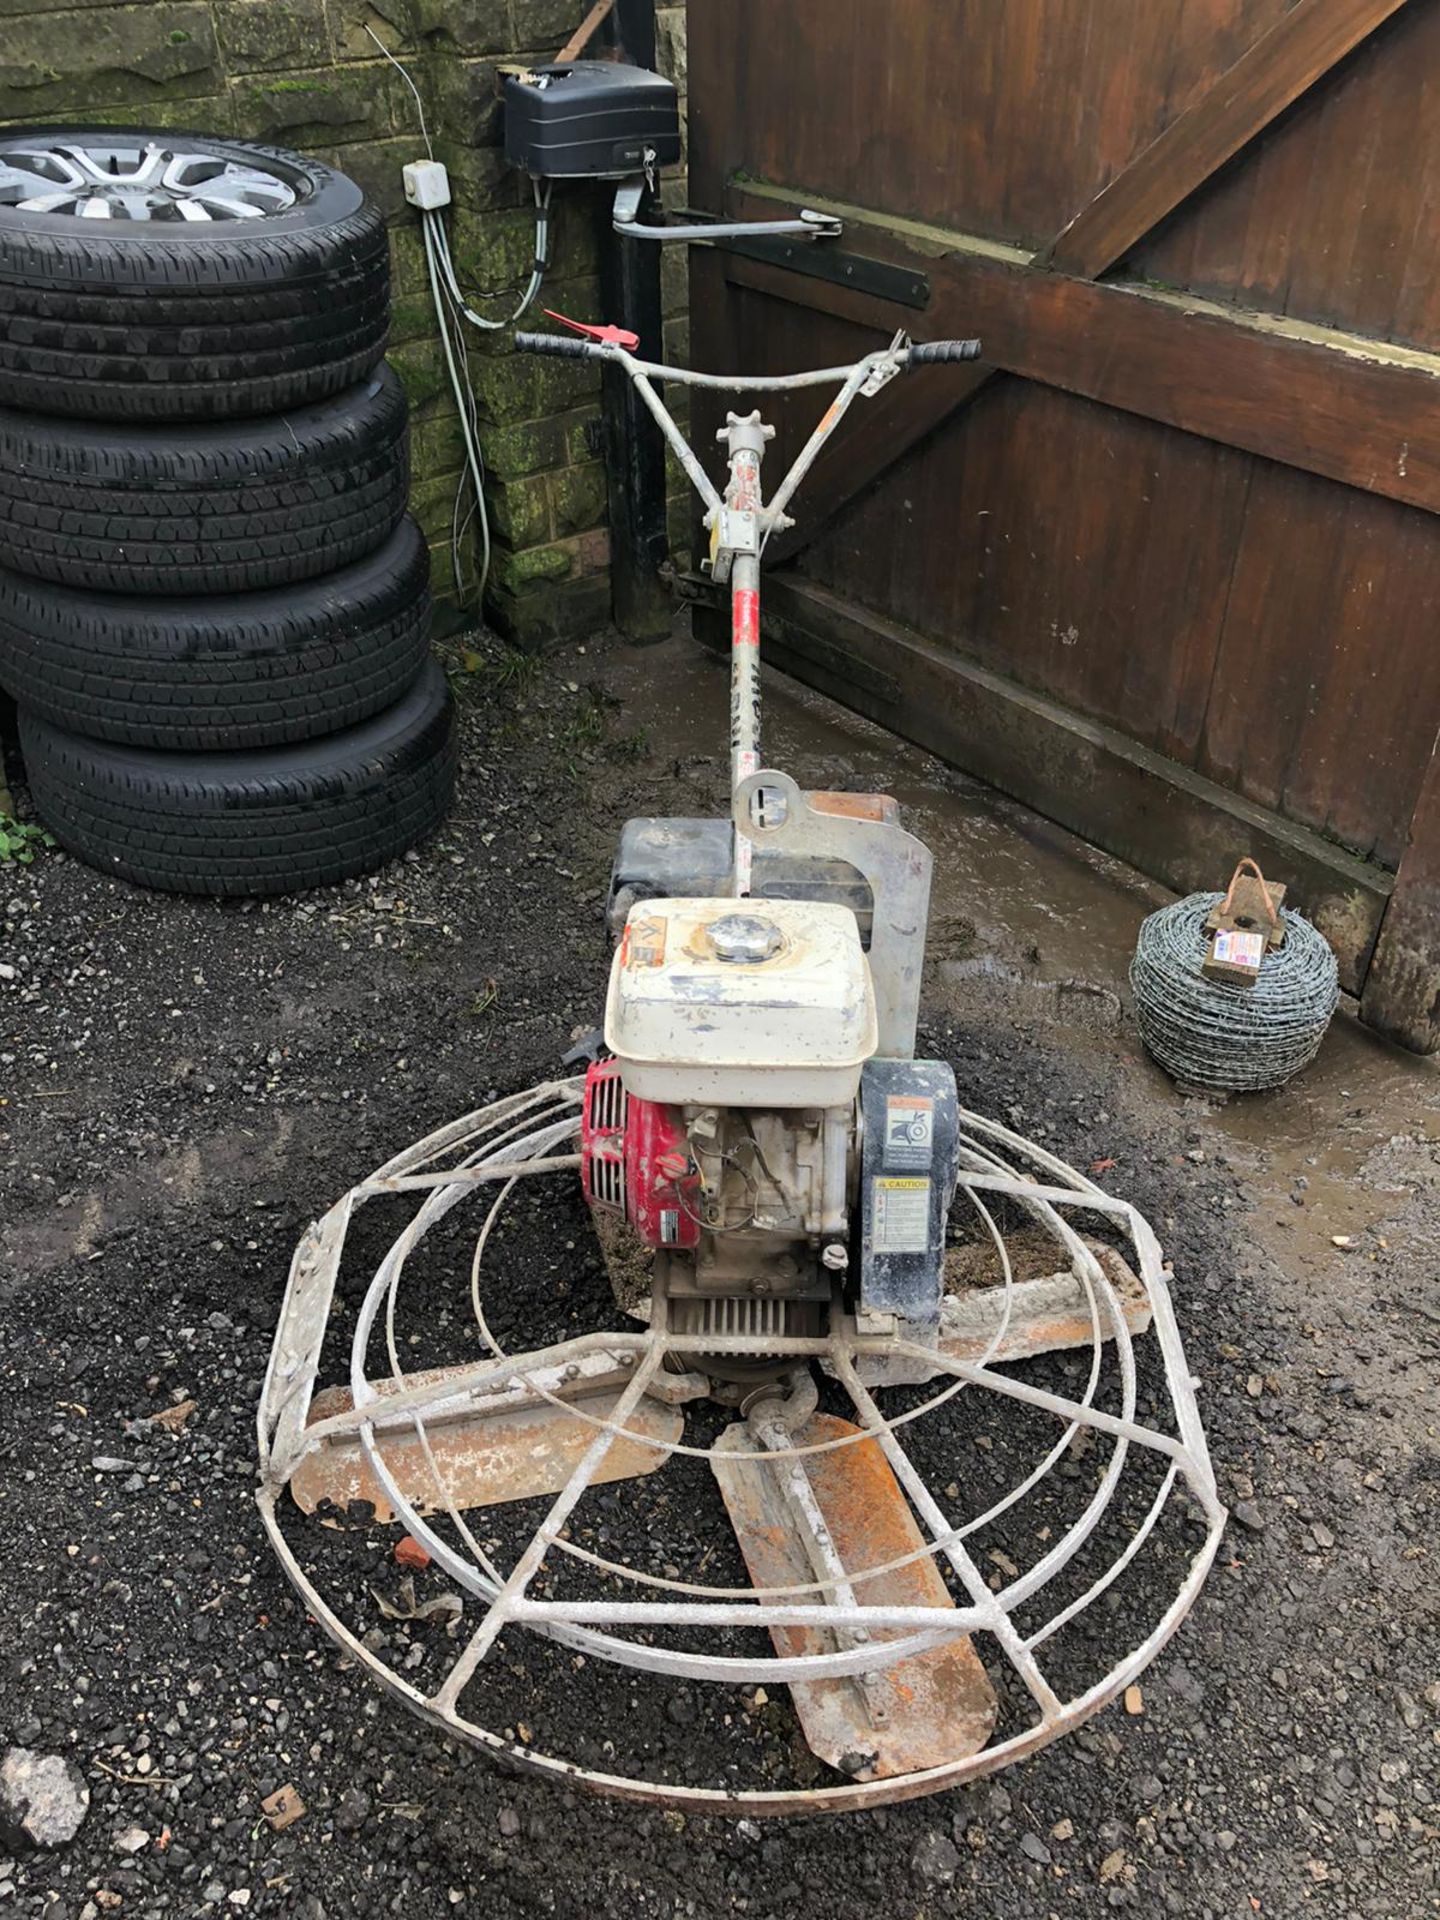 MBW CONCRETE POWER FLOAT SCREED, RUNS AND WORKS WELL, HONDA GX240 ENGINE *NO VAT* - Image 3 of 5